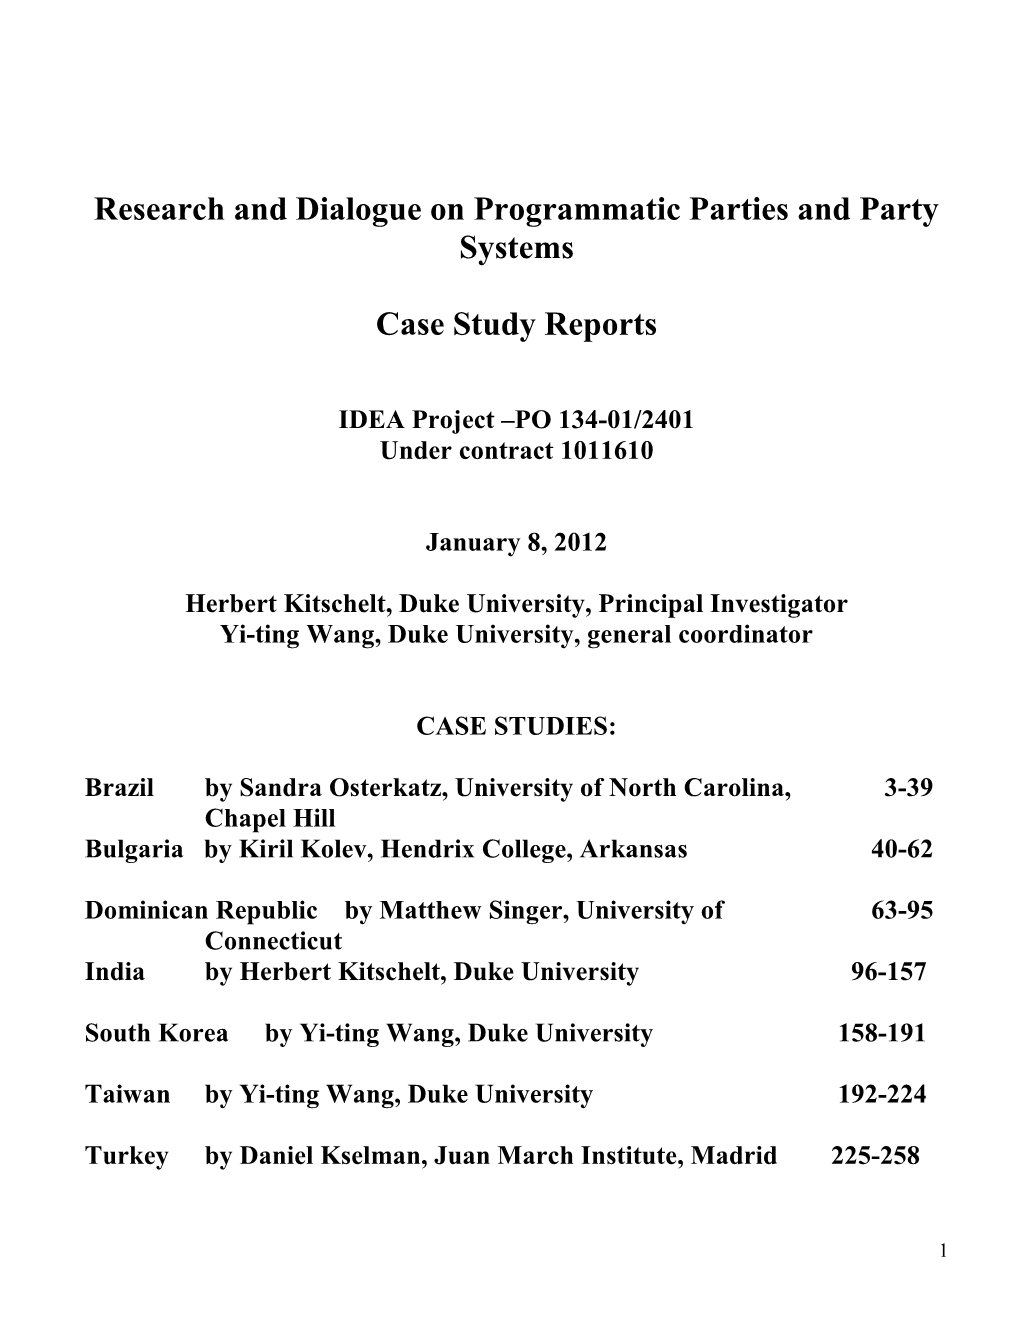 Research and Dialogue on Programmatic Parties and Party Systems